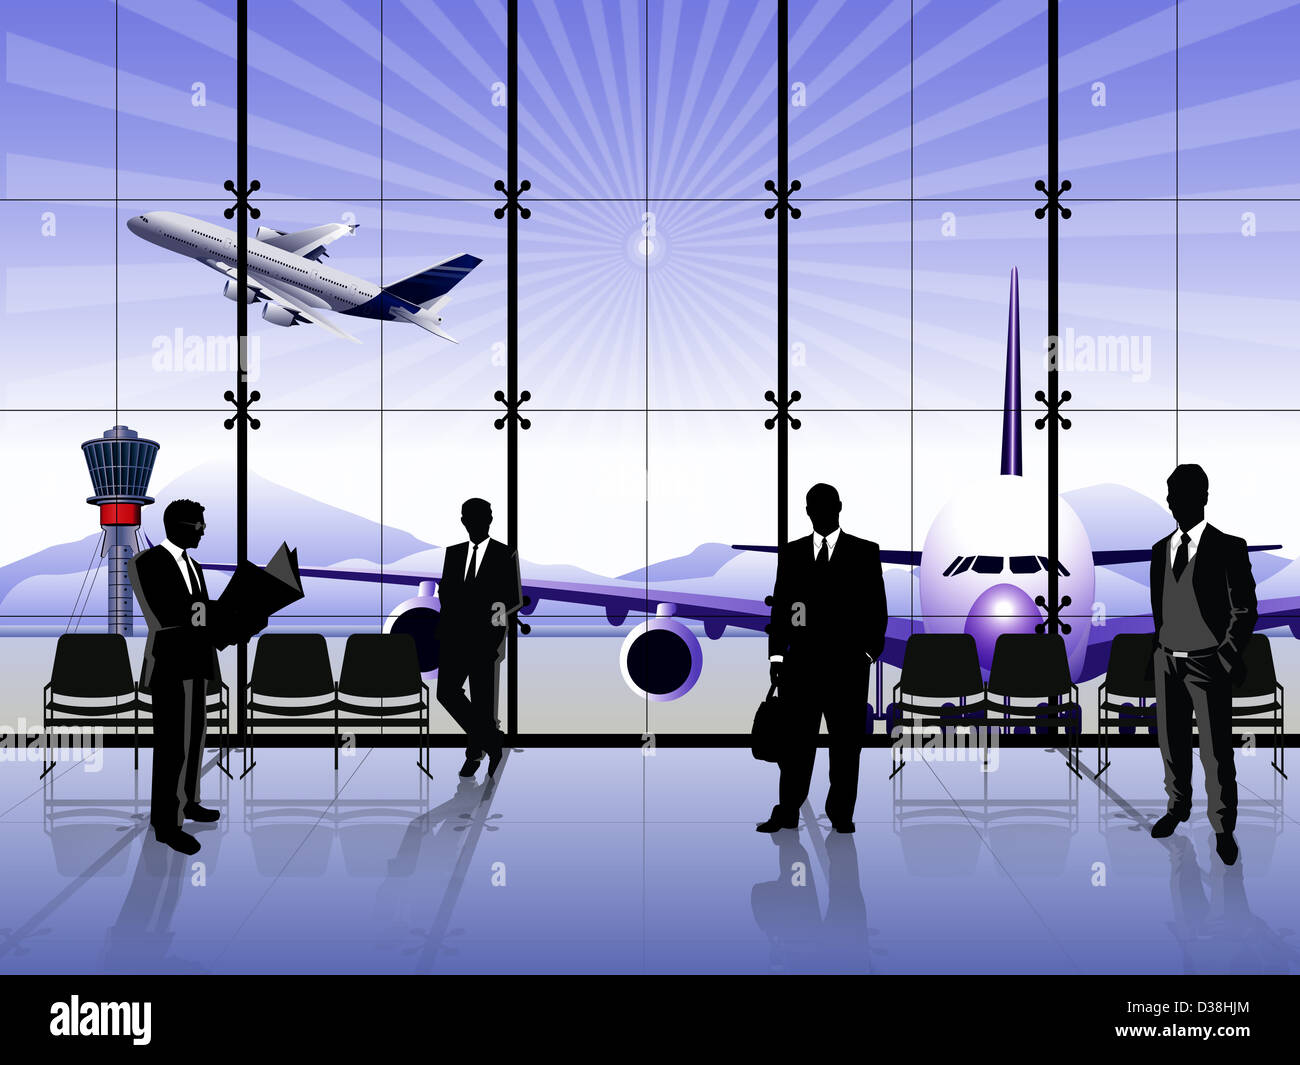 Businessmen waiting at an airport lounge Stock Photo